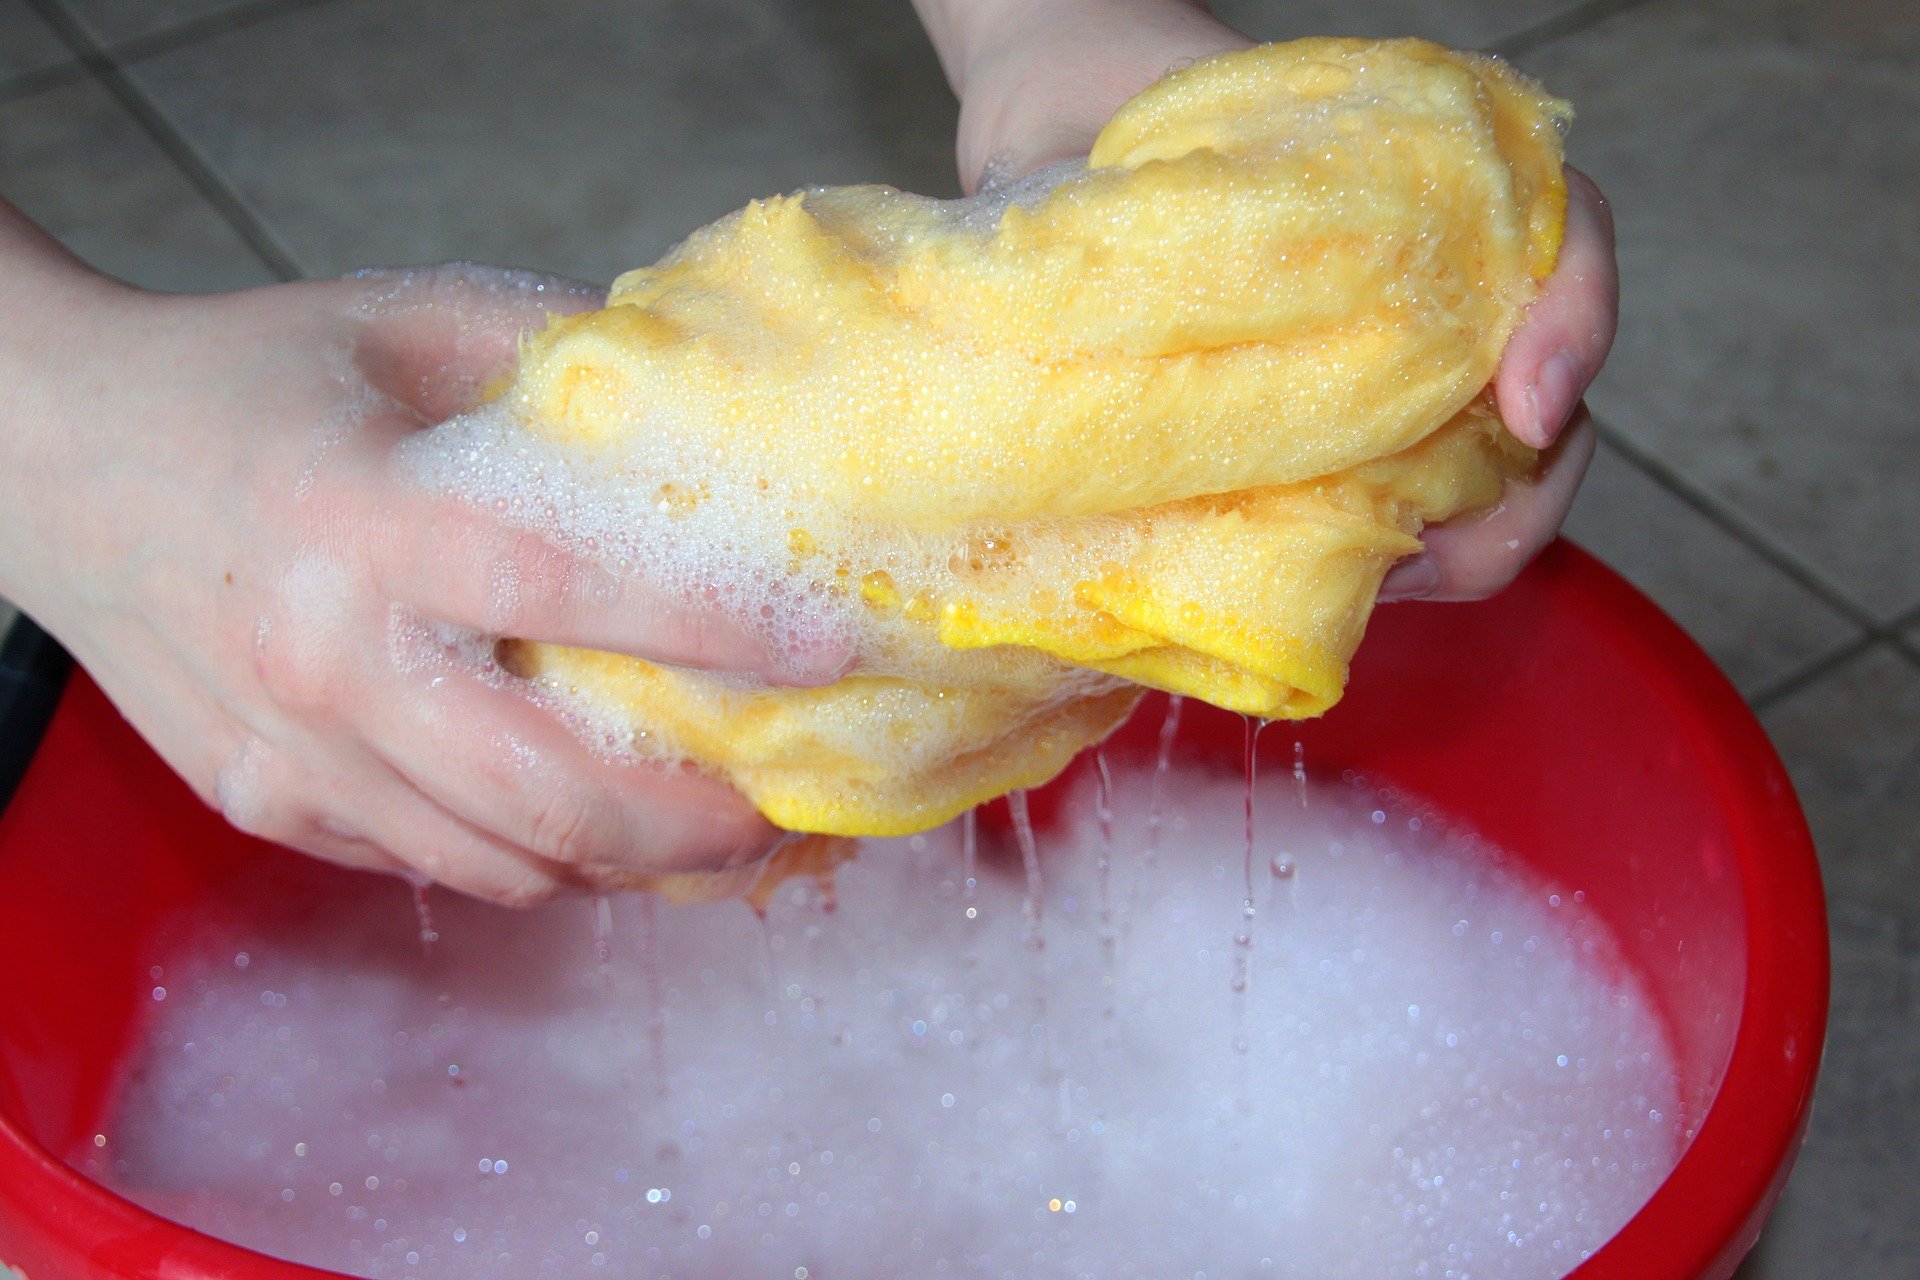 A person using a yellow cloth in a red bucket of soapy water